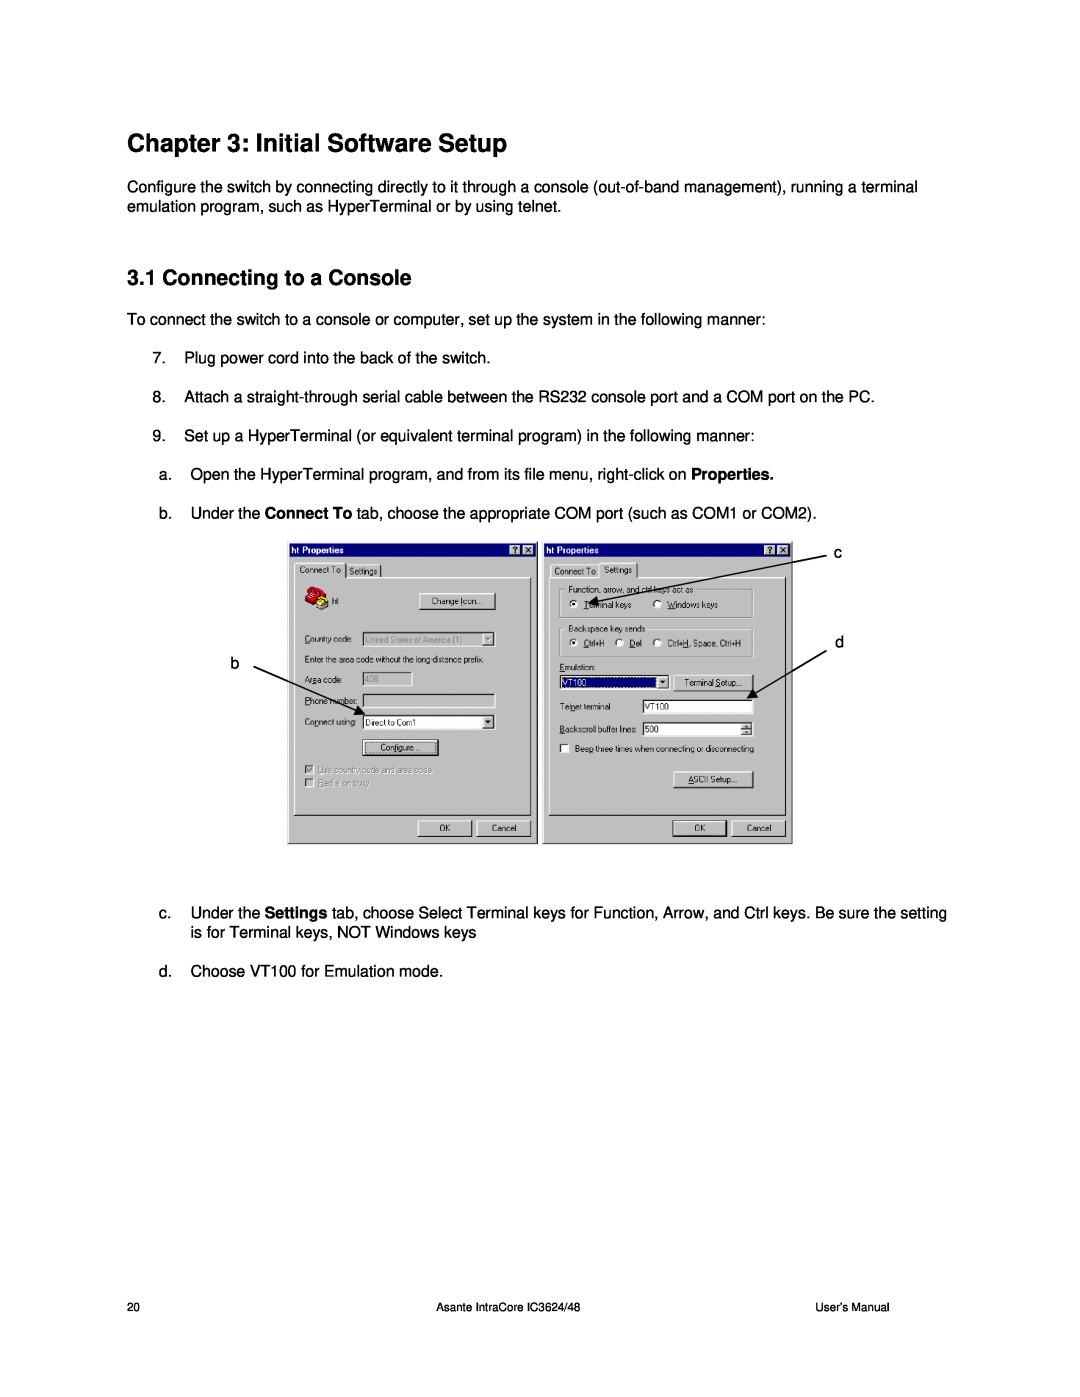 Asante Technologies 3624/48 user manual Initial Software Setup, Connecting to a Console 